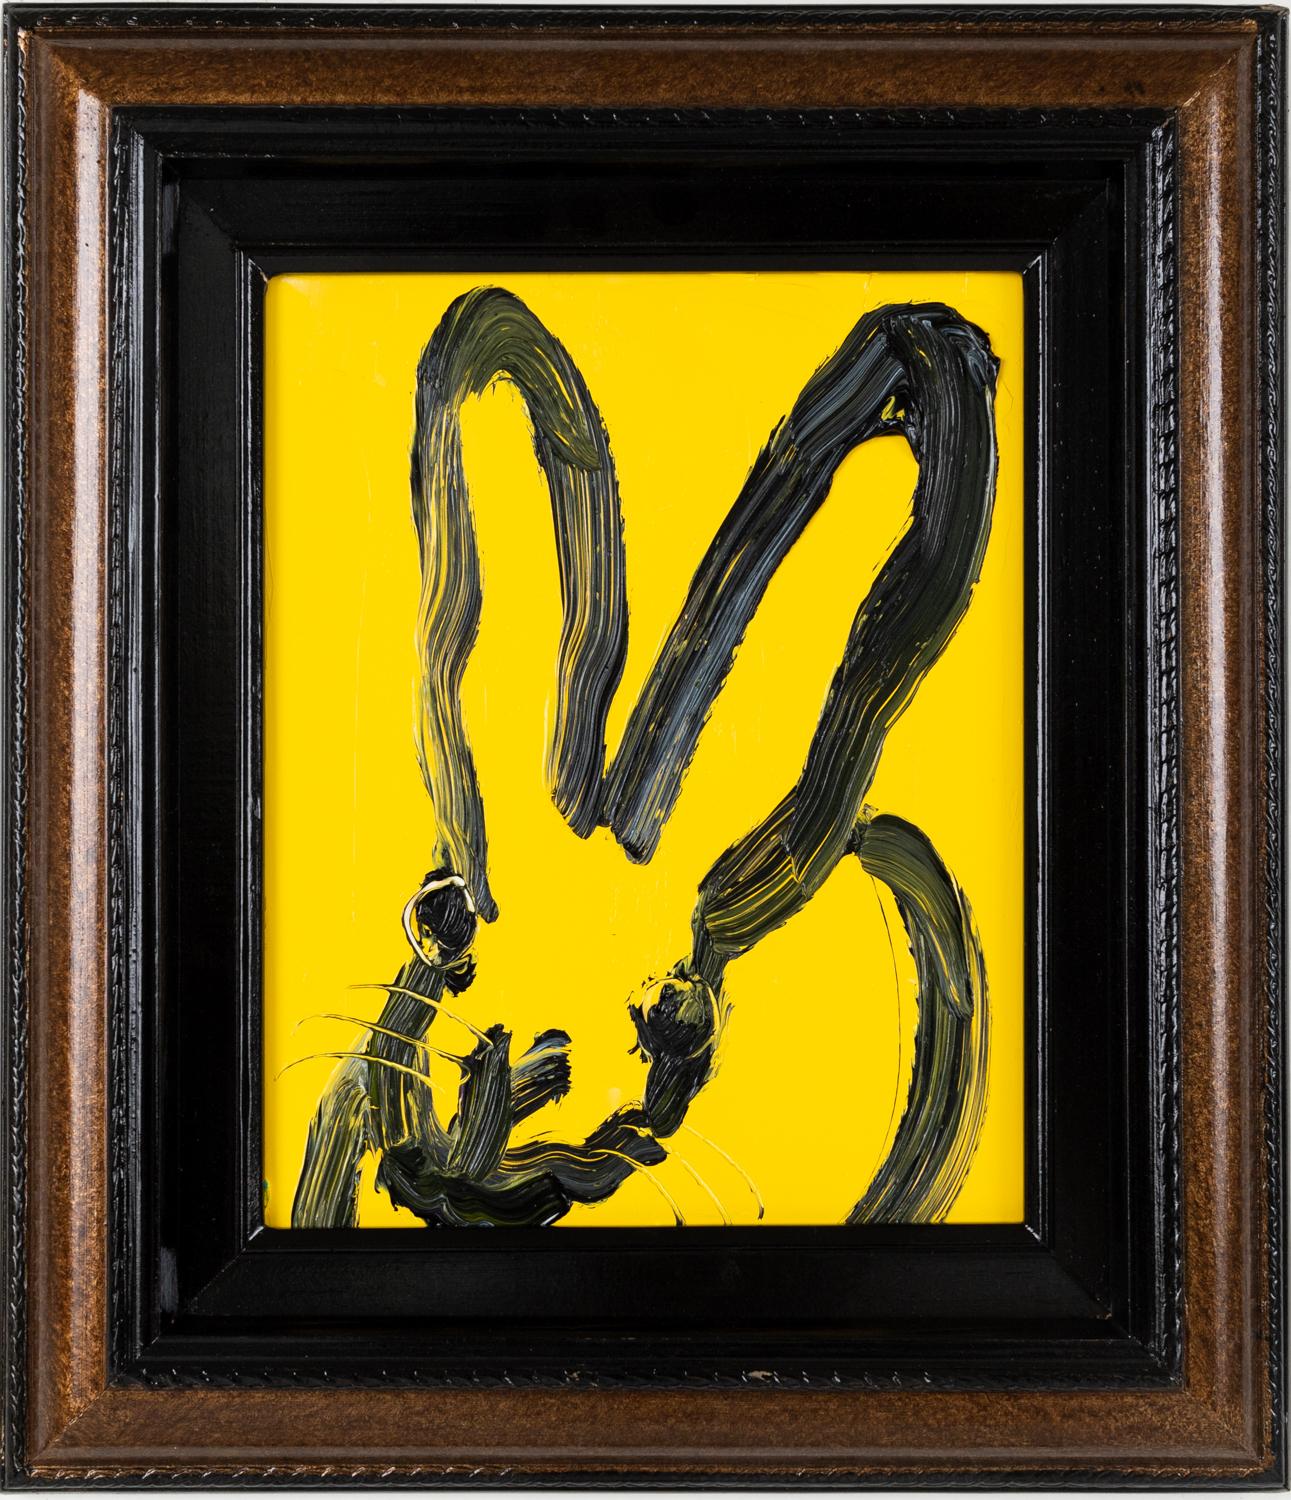 Hunt Slonem Figurative Painting - Tansy 2 "Bunny Painting" Original Oil Painting in Vintage Frame